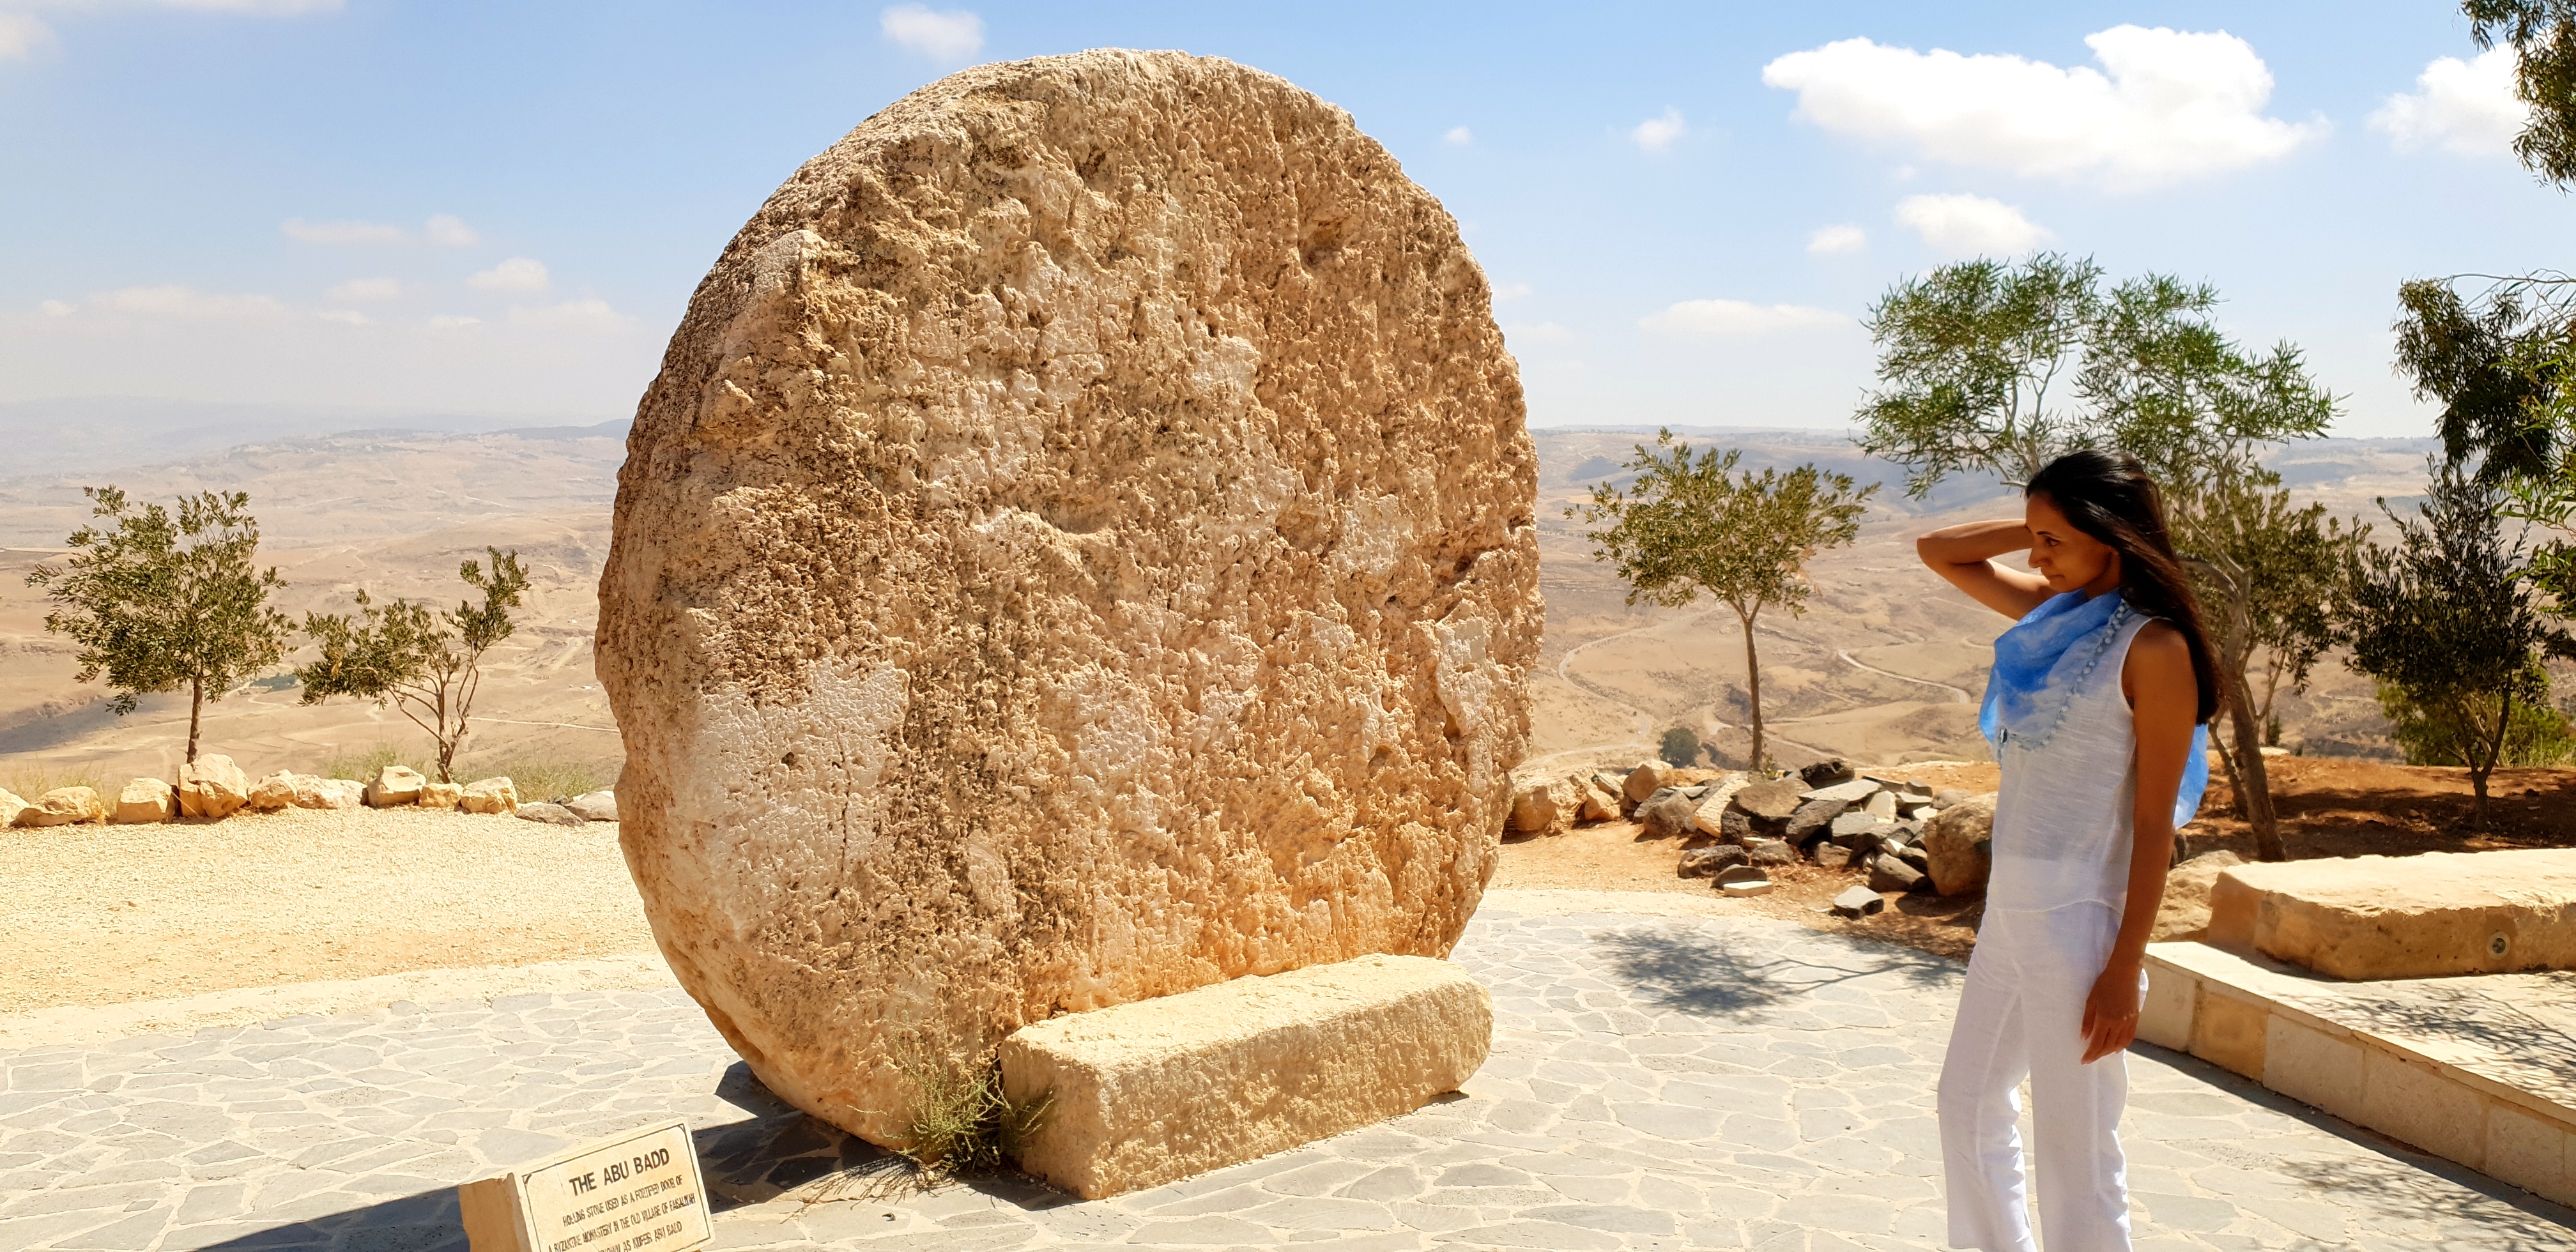 Mount Nebo and its Religious References